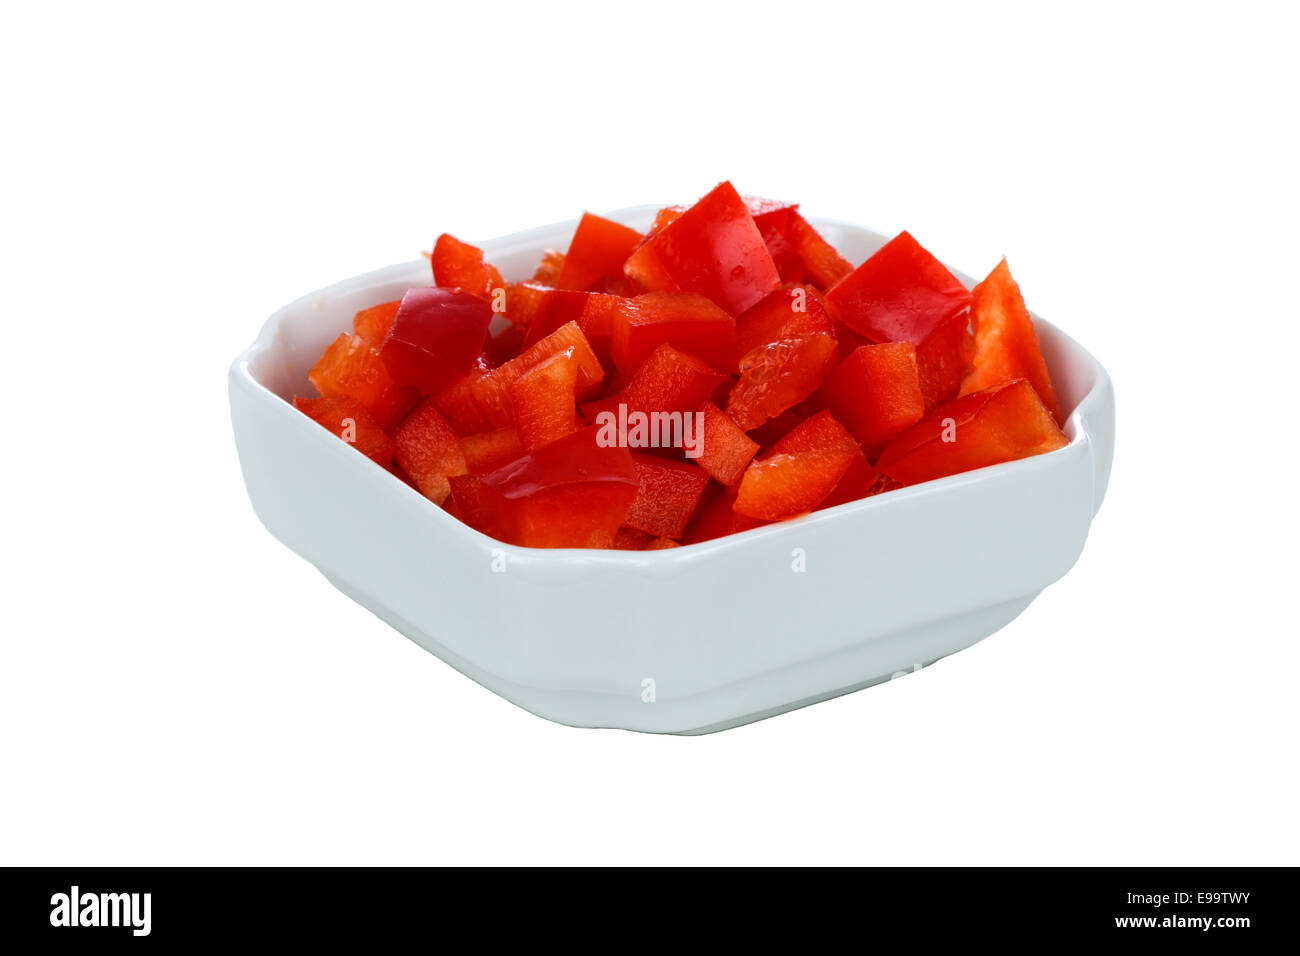 Chopped red pepper in white bowl over white background Stock Photo